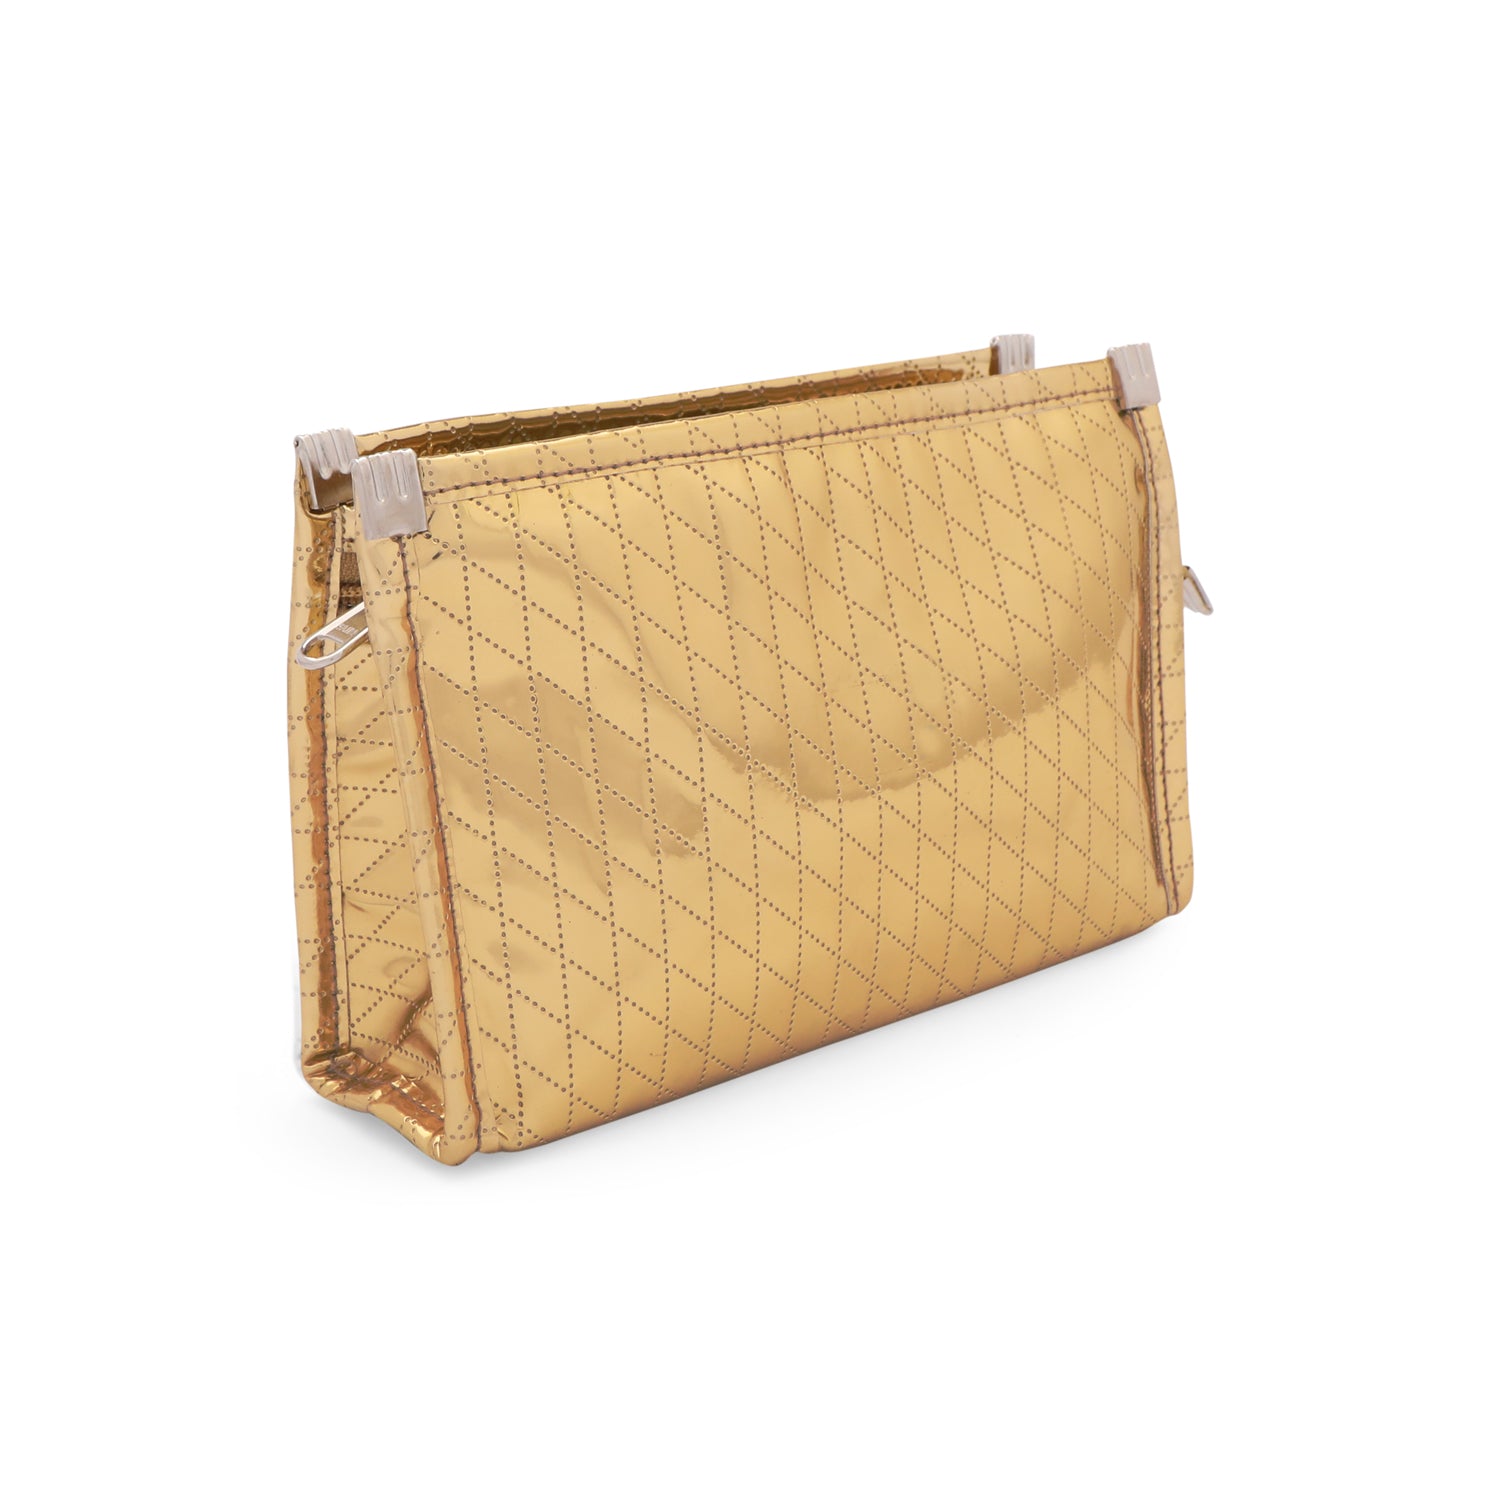 Travel Pouch - Gold 3 Pockets Pouch - Set of 3 Pouches